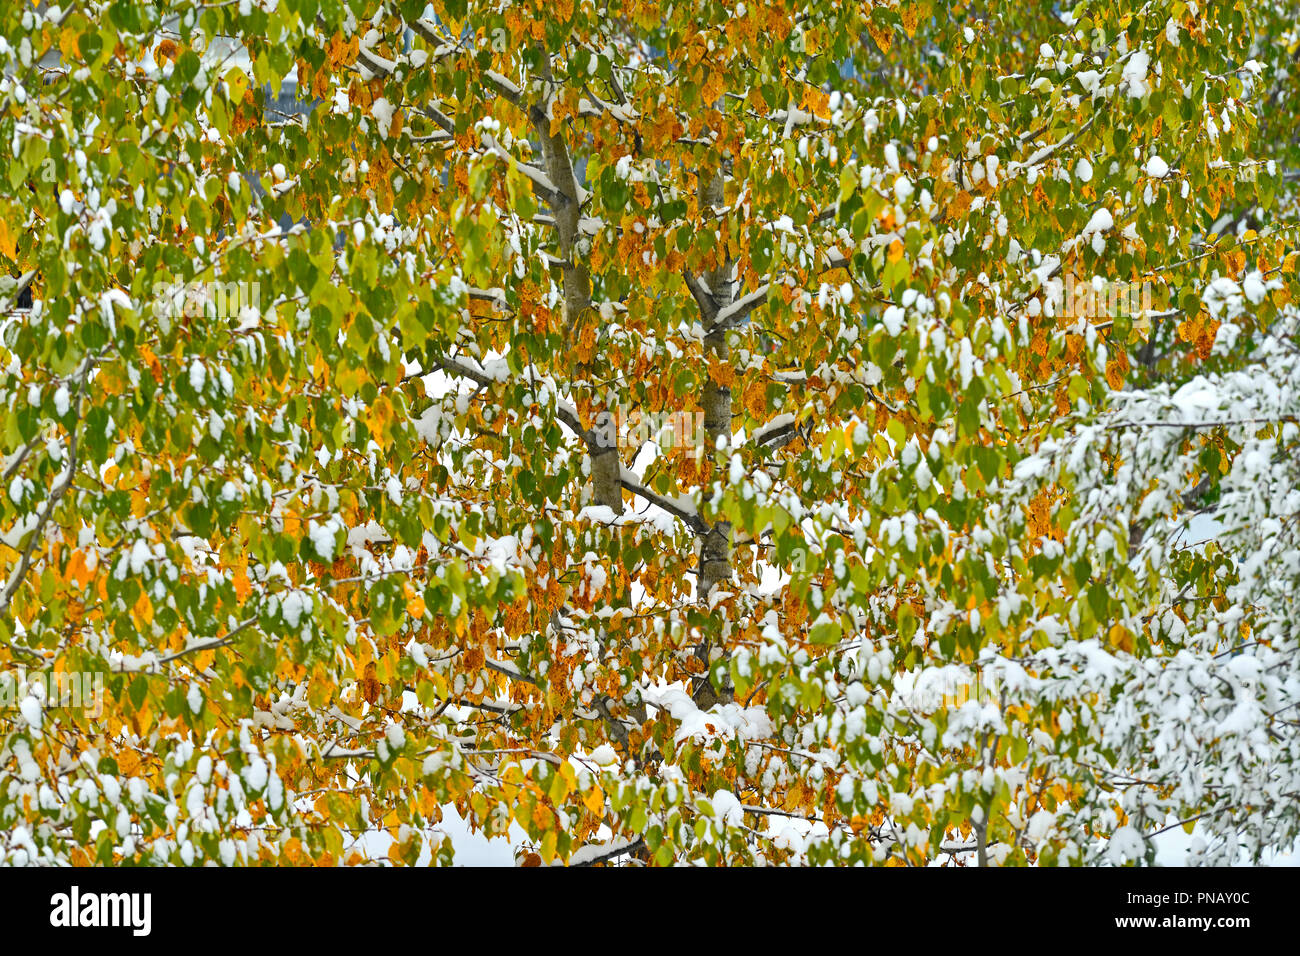 A horizontal nature image of the first September snow falling on colorful leaves of a deciduous tree in rural Alberta Canada. Stock Photo